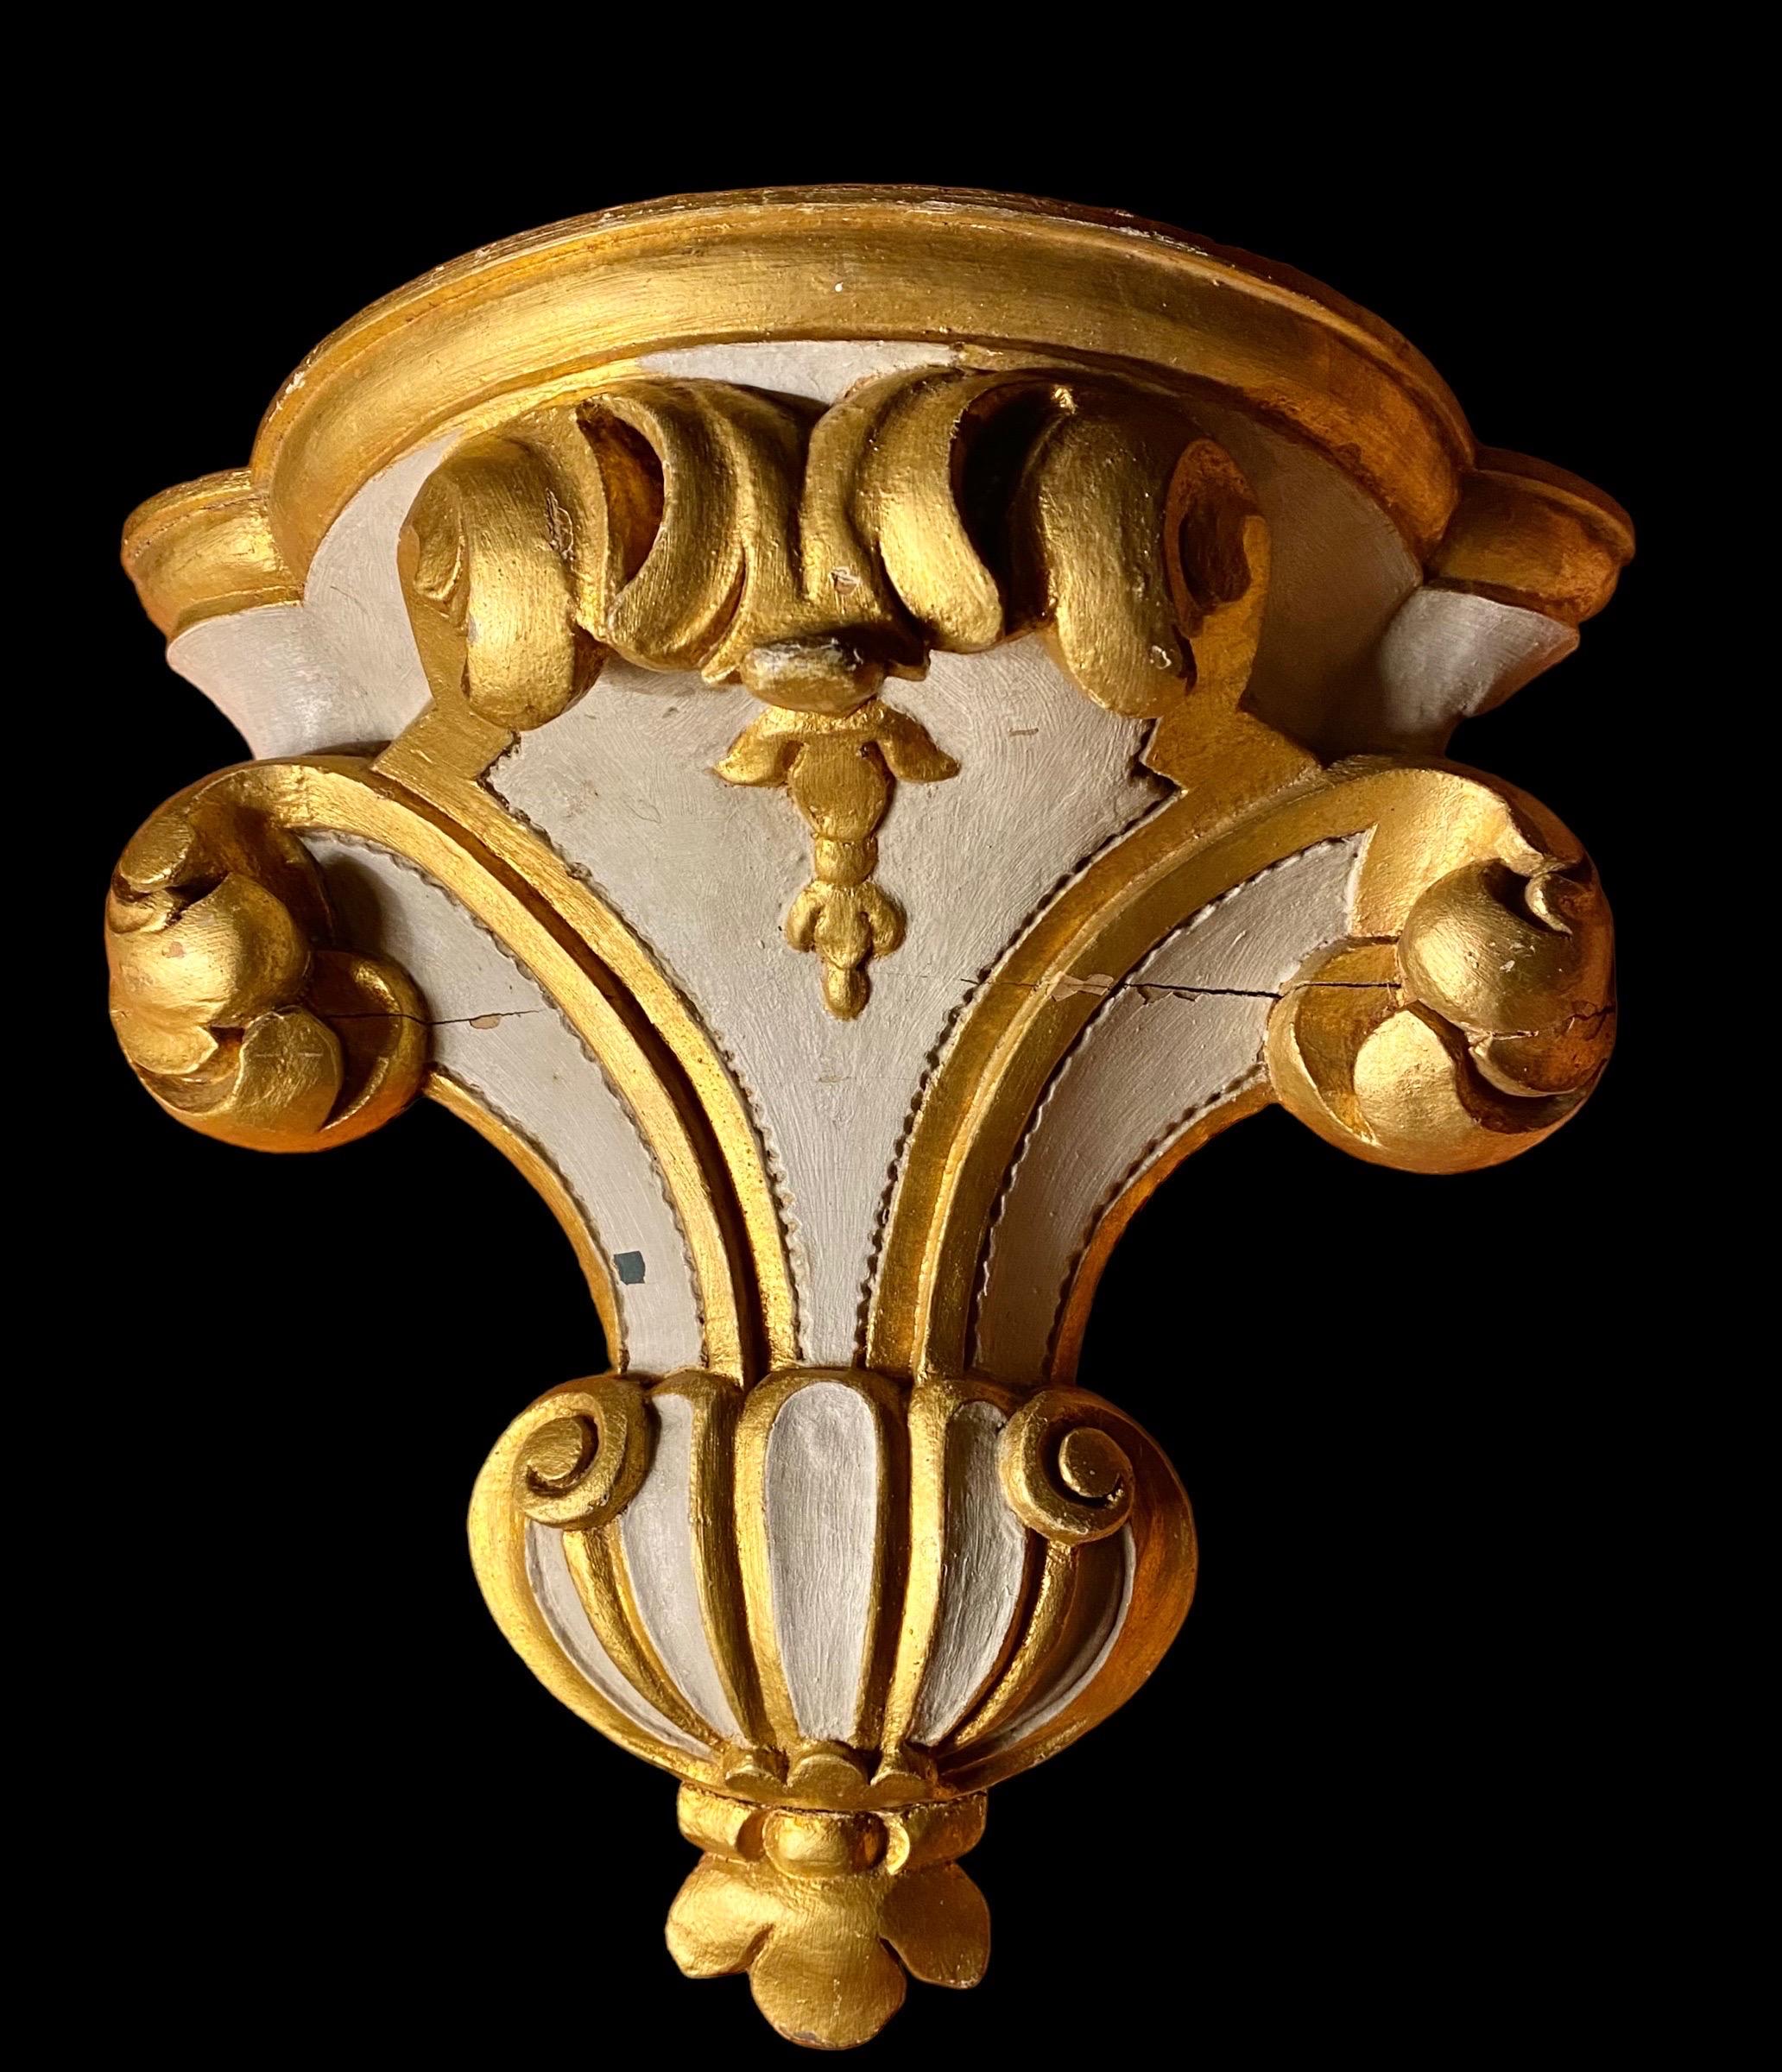 A 19th century Italian Painted and Parcel-Gilt Wall Bracket with fleur-de-lis and Acanthus Leaves.

This Italian architectural piece, from the late 19th century, has been hand-carved in a scroll and leaf motif. The Demilune shelf top has a beveled